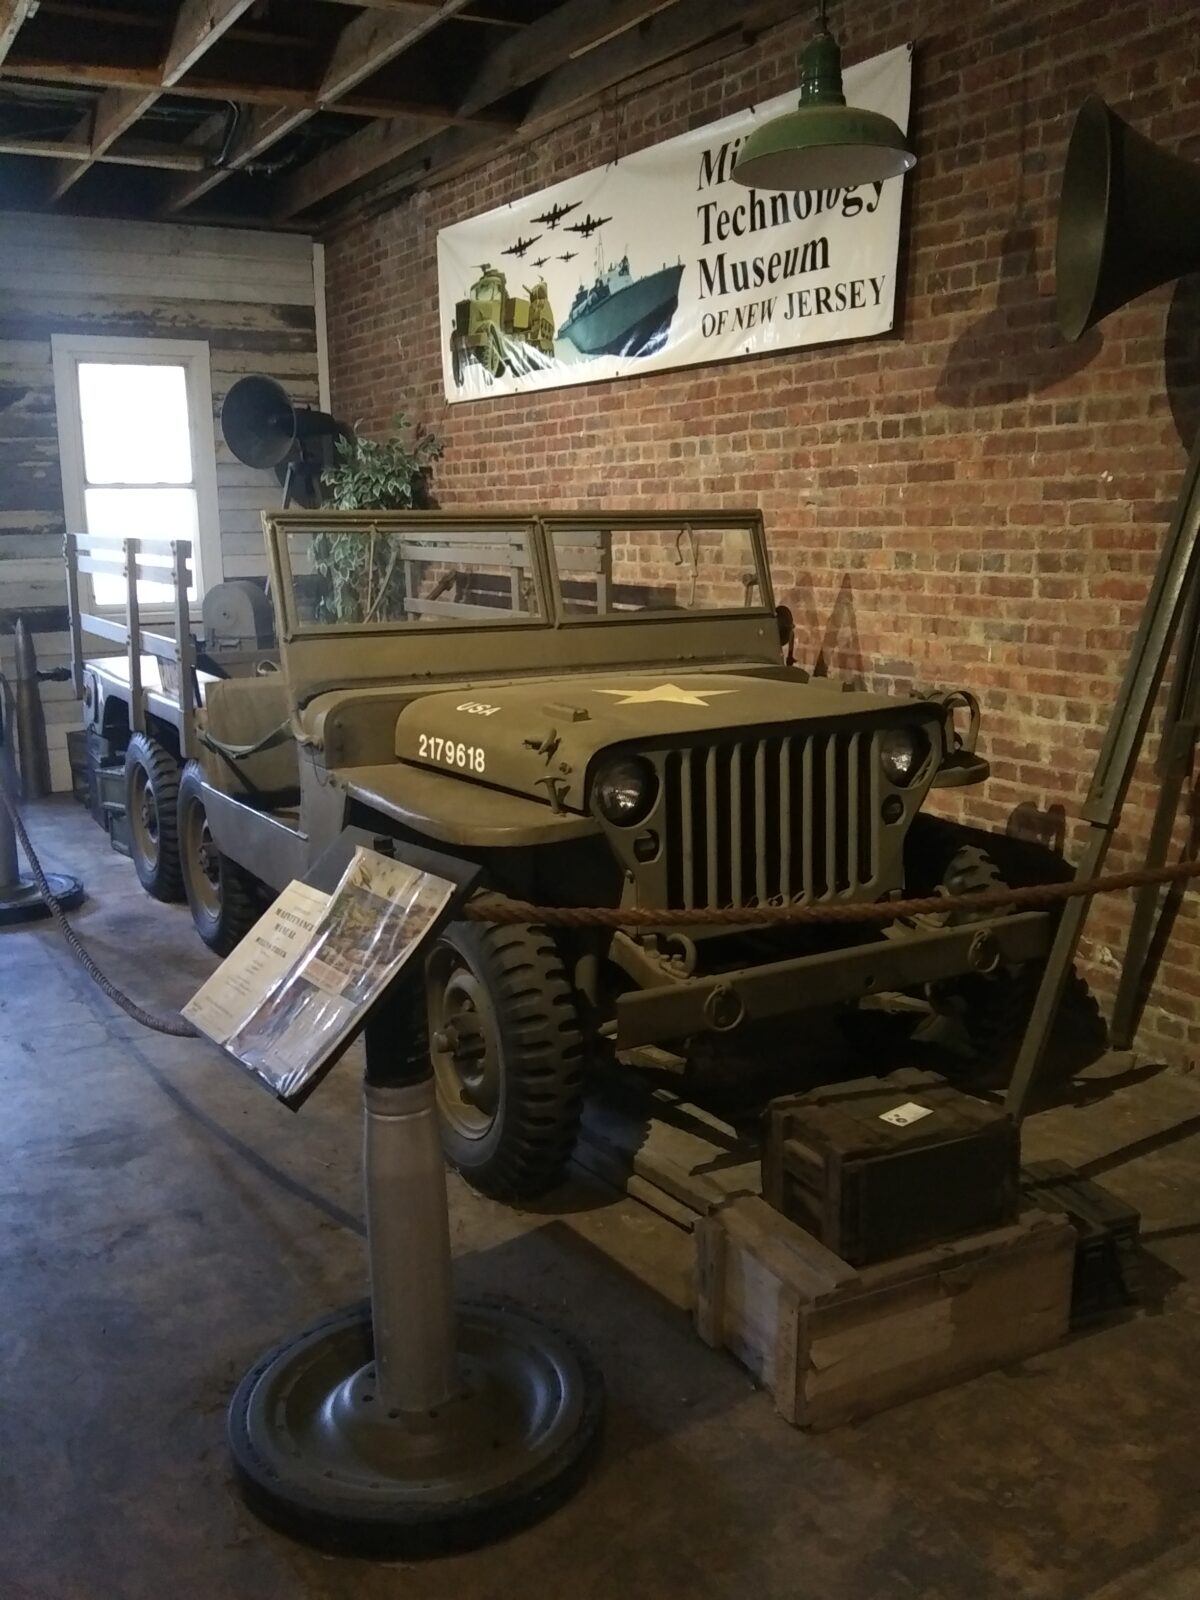 Military Technology Museum of New Jersey